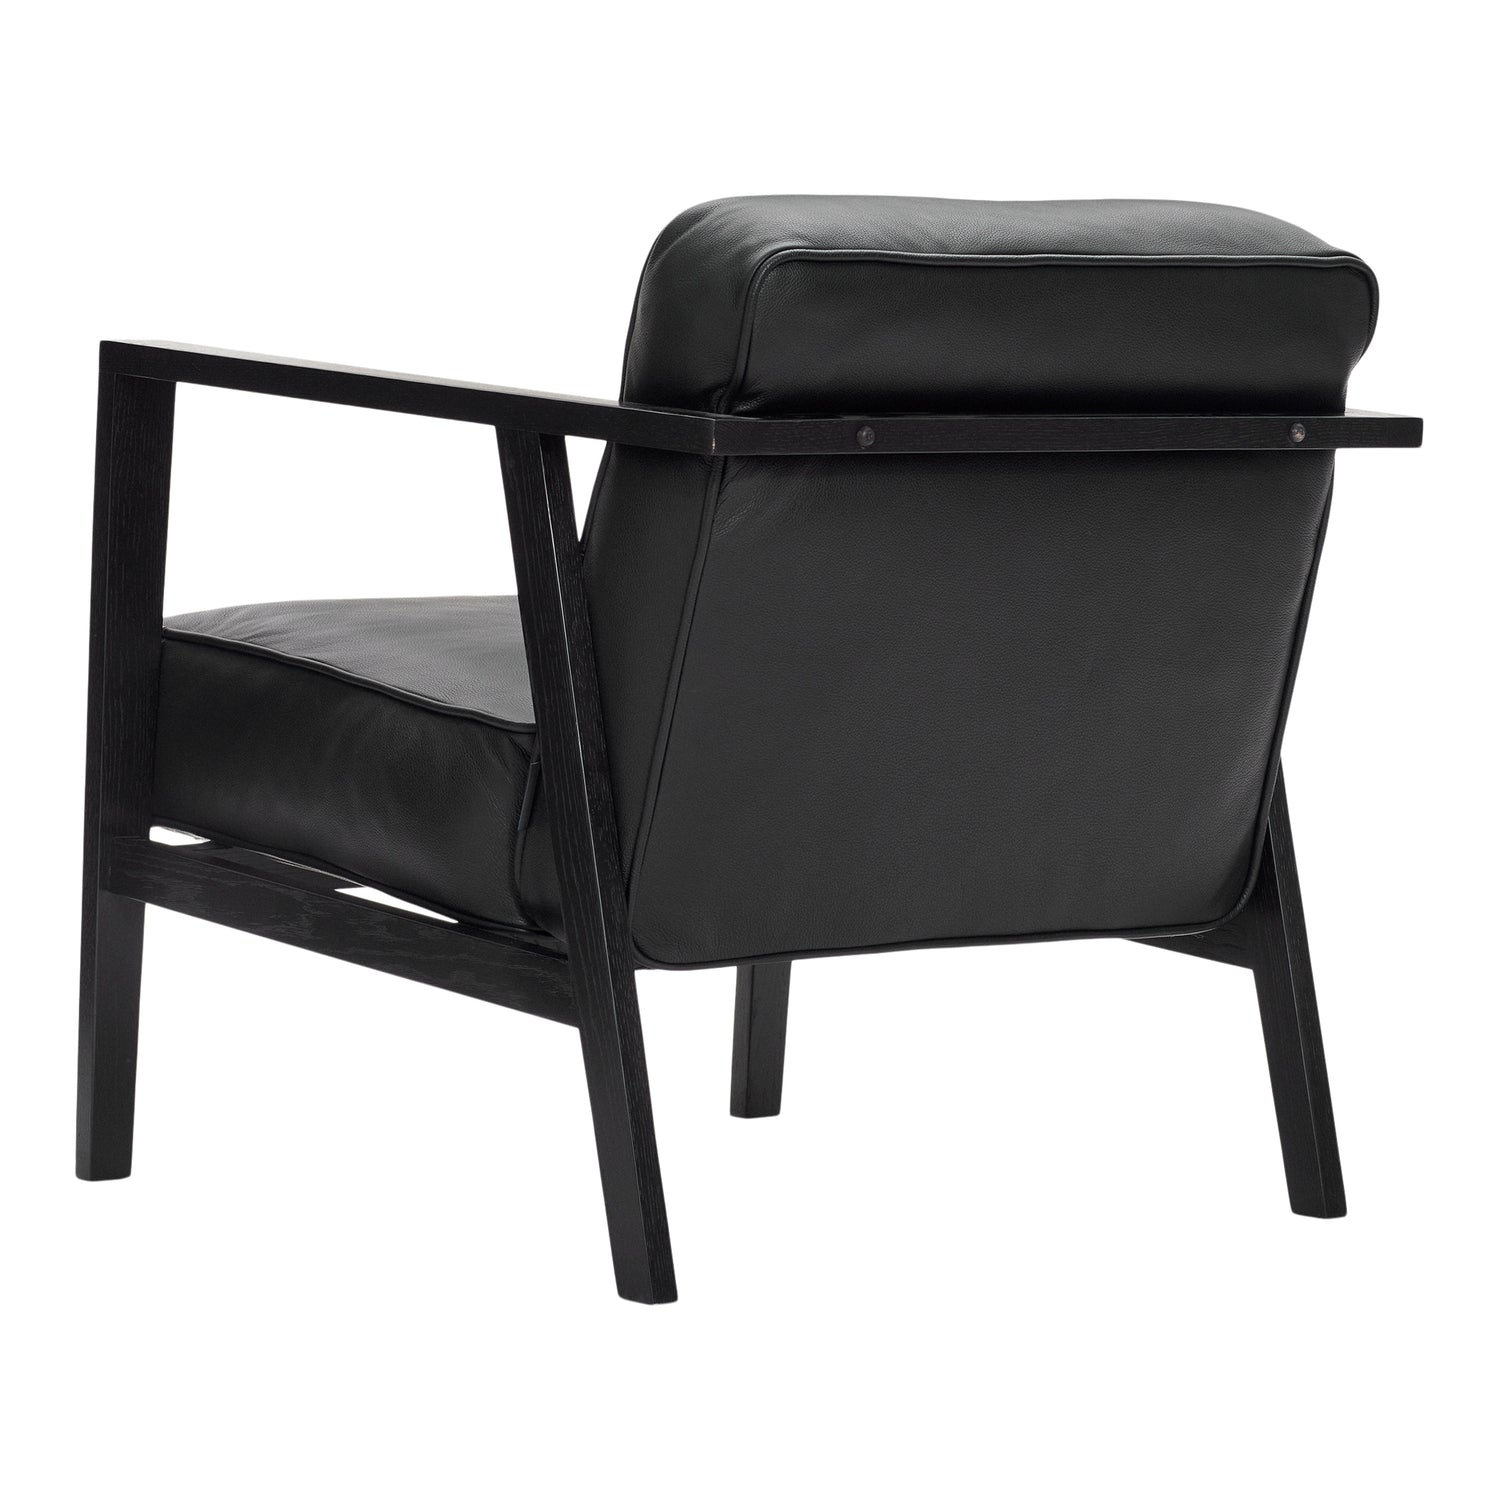 Andersen Furniture - LC1 Lounge chair - Black leather/frame in black lacquered